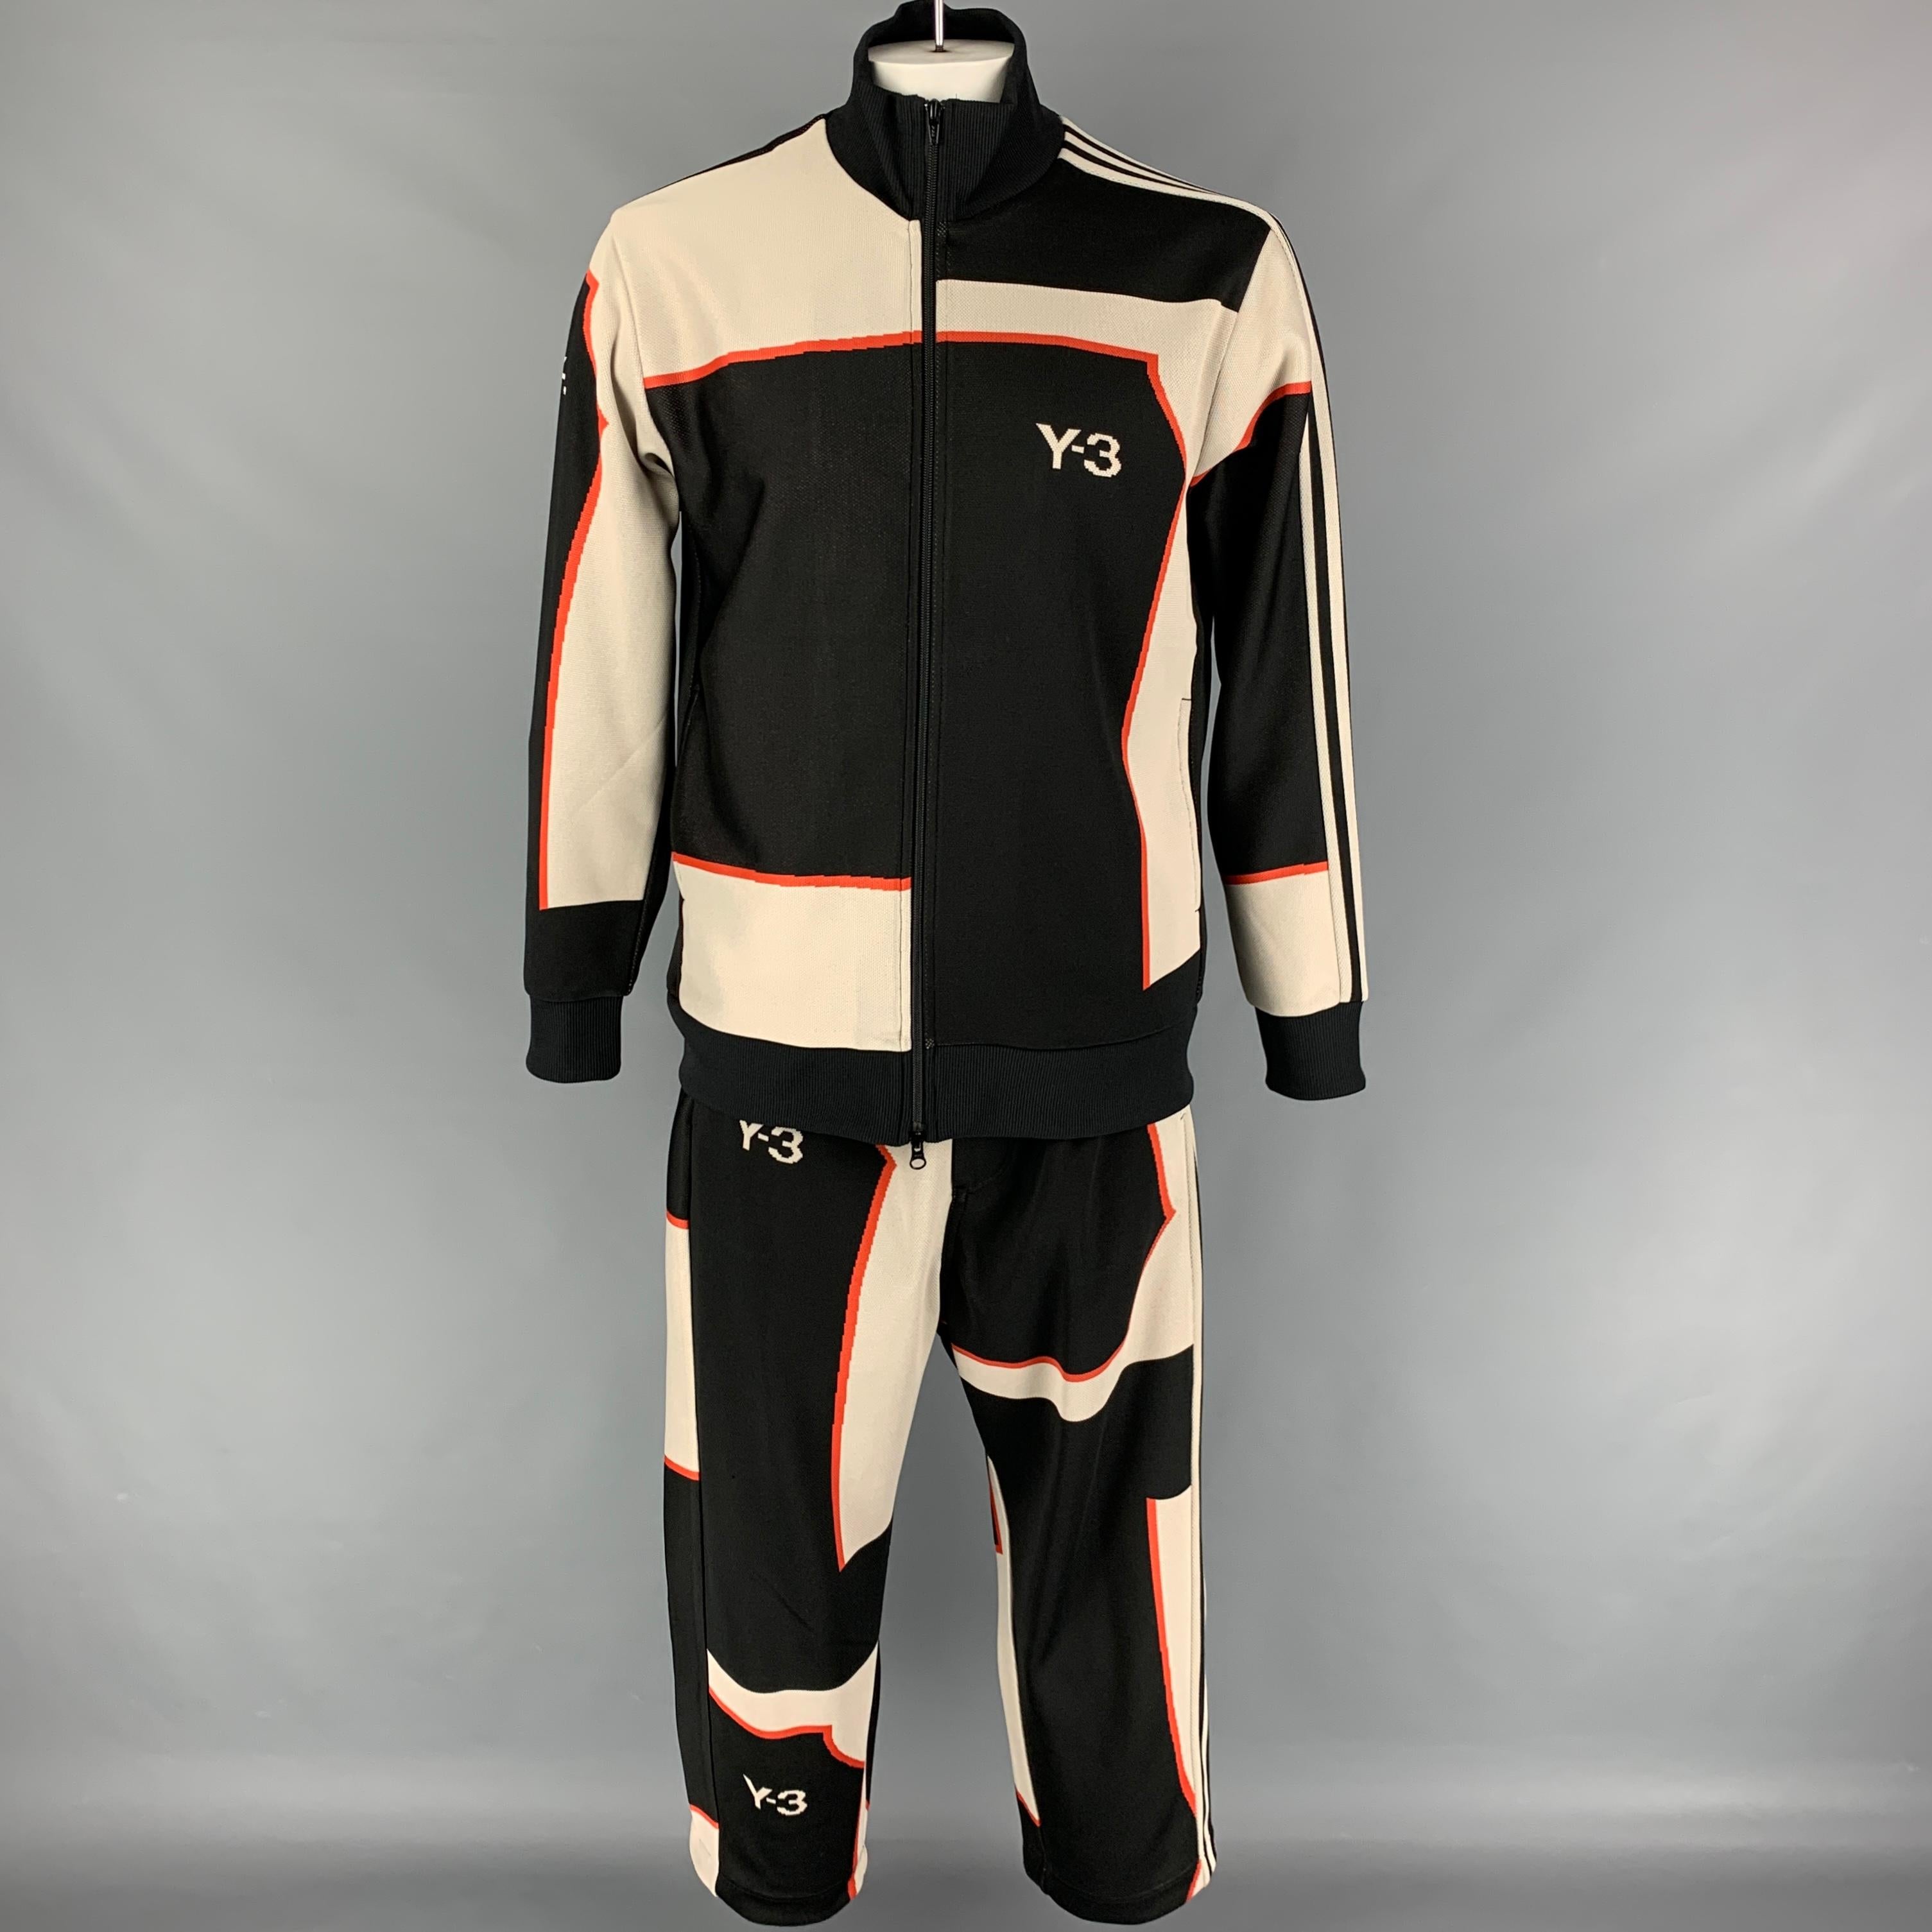 Y-3 by YOHJI YAMAMOTO track suit comes in a black & cream color block polyester featuring a high collar, ribbed hem, full zip up closure, and matching sweatpants.

Excellent Pre-Owned Condition.
Marked: XL

Measurements:

-Jacket
Shoulder: 19